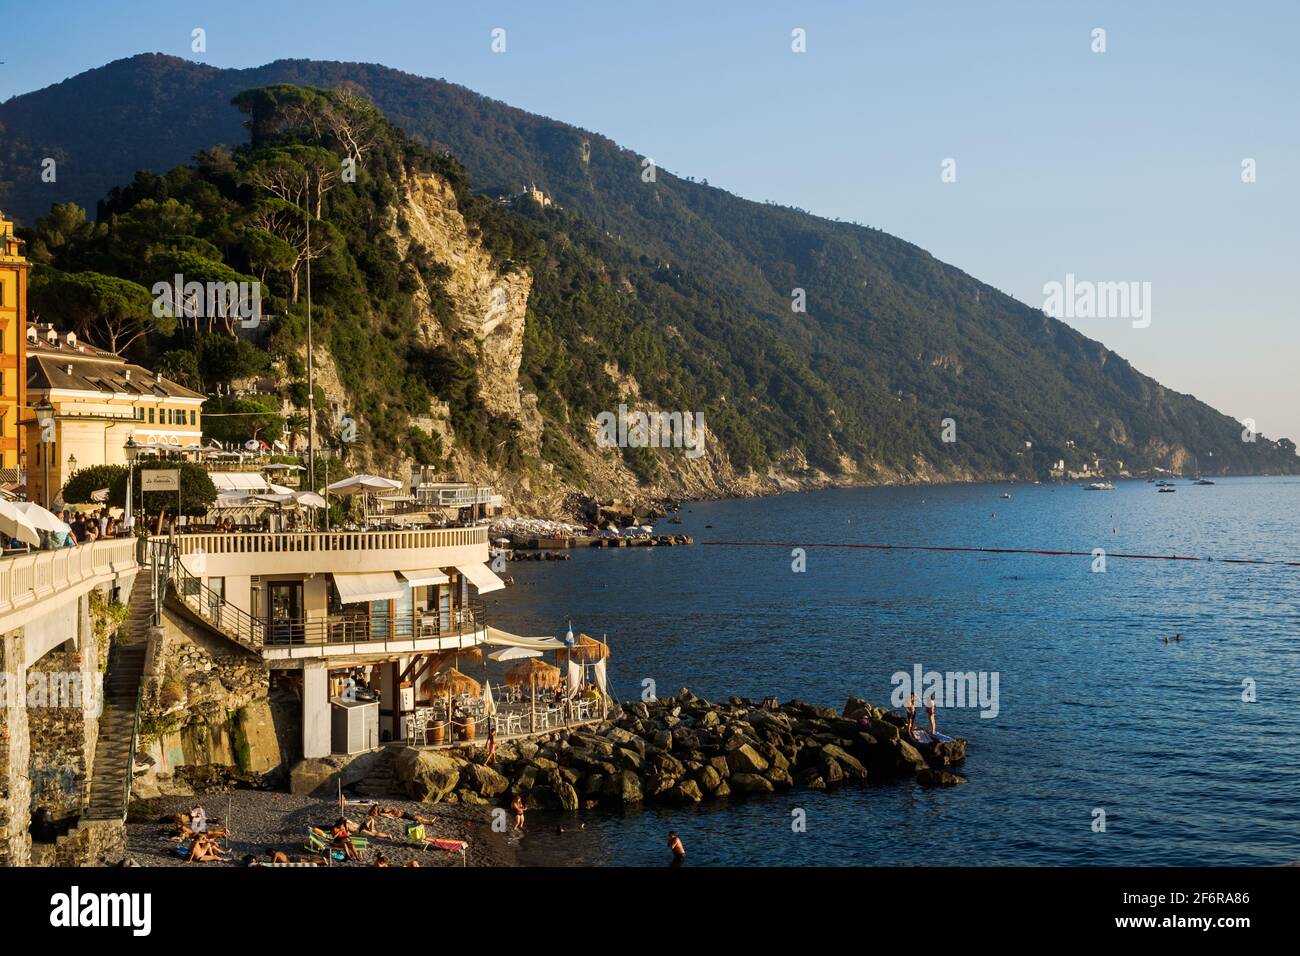 The coastline of Camogli towards San Fruttuoso is rough and hilly. The views in the part of Liguria are spectacular. Stock Photo